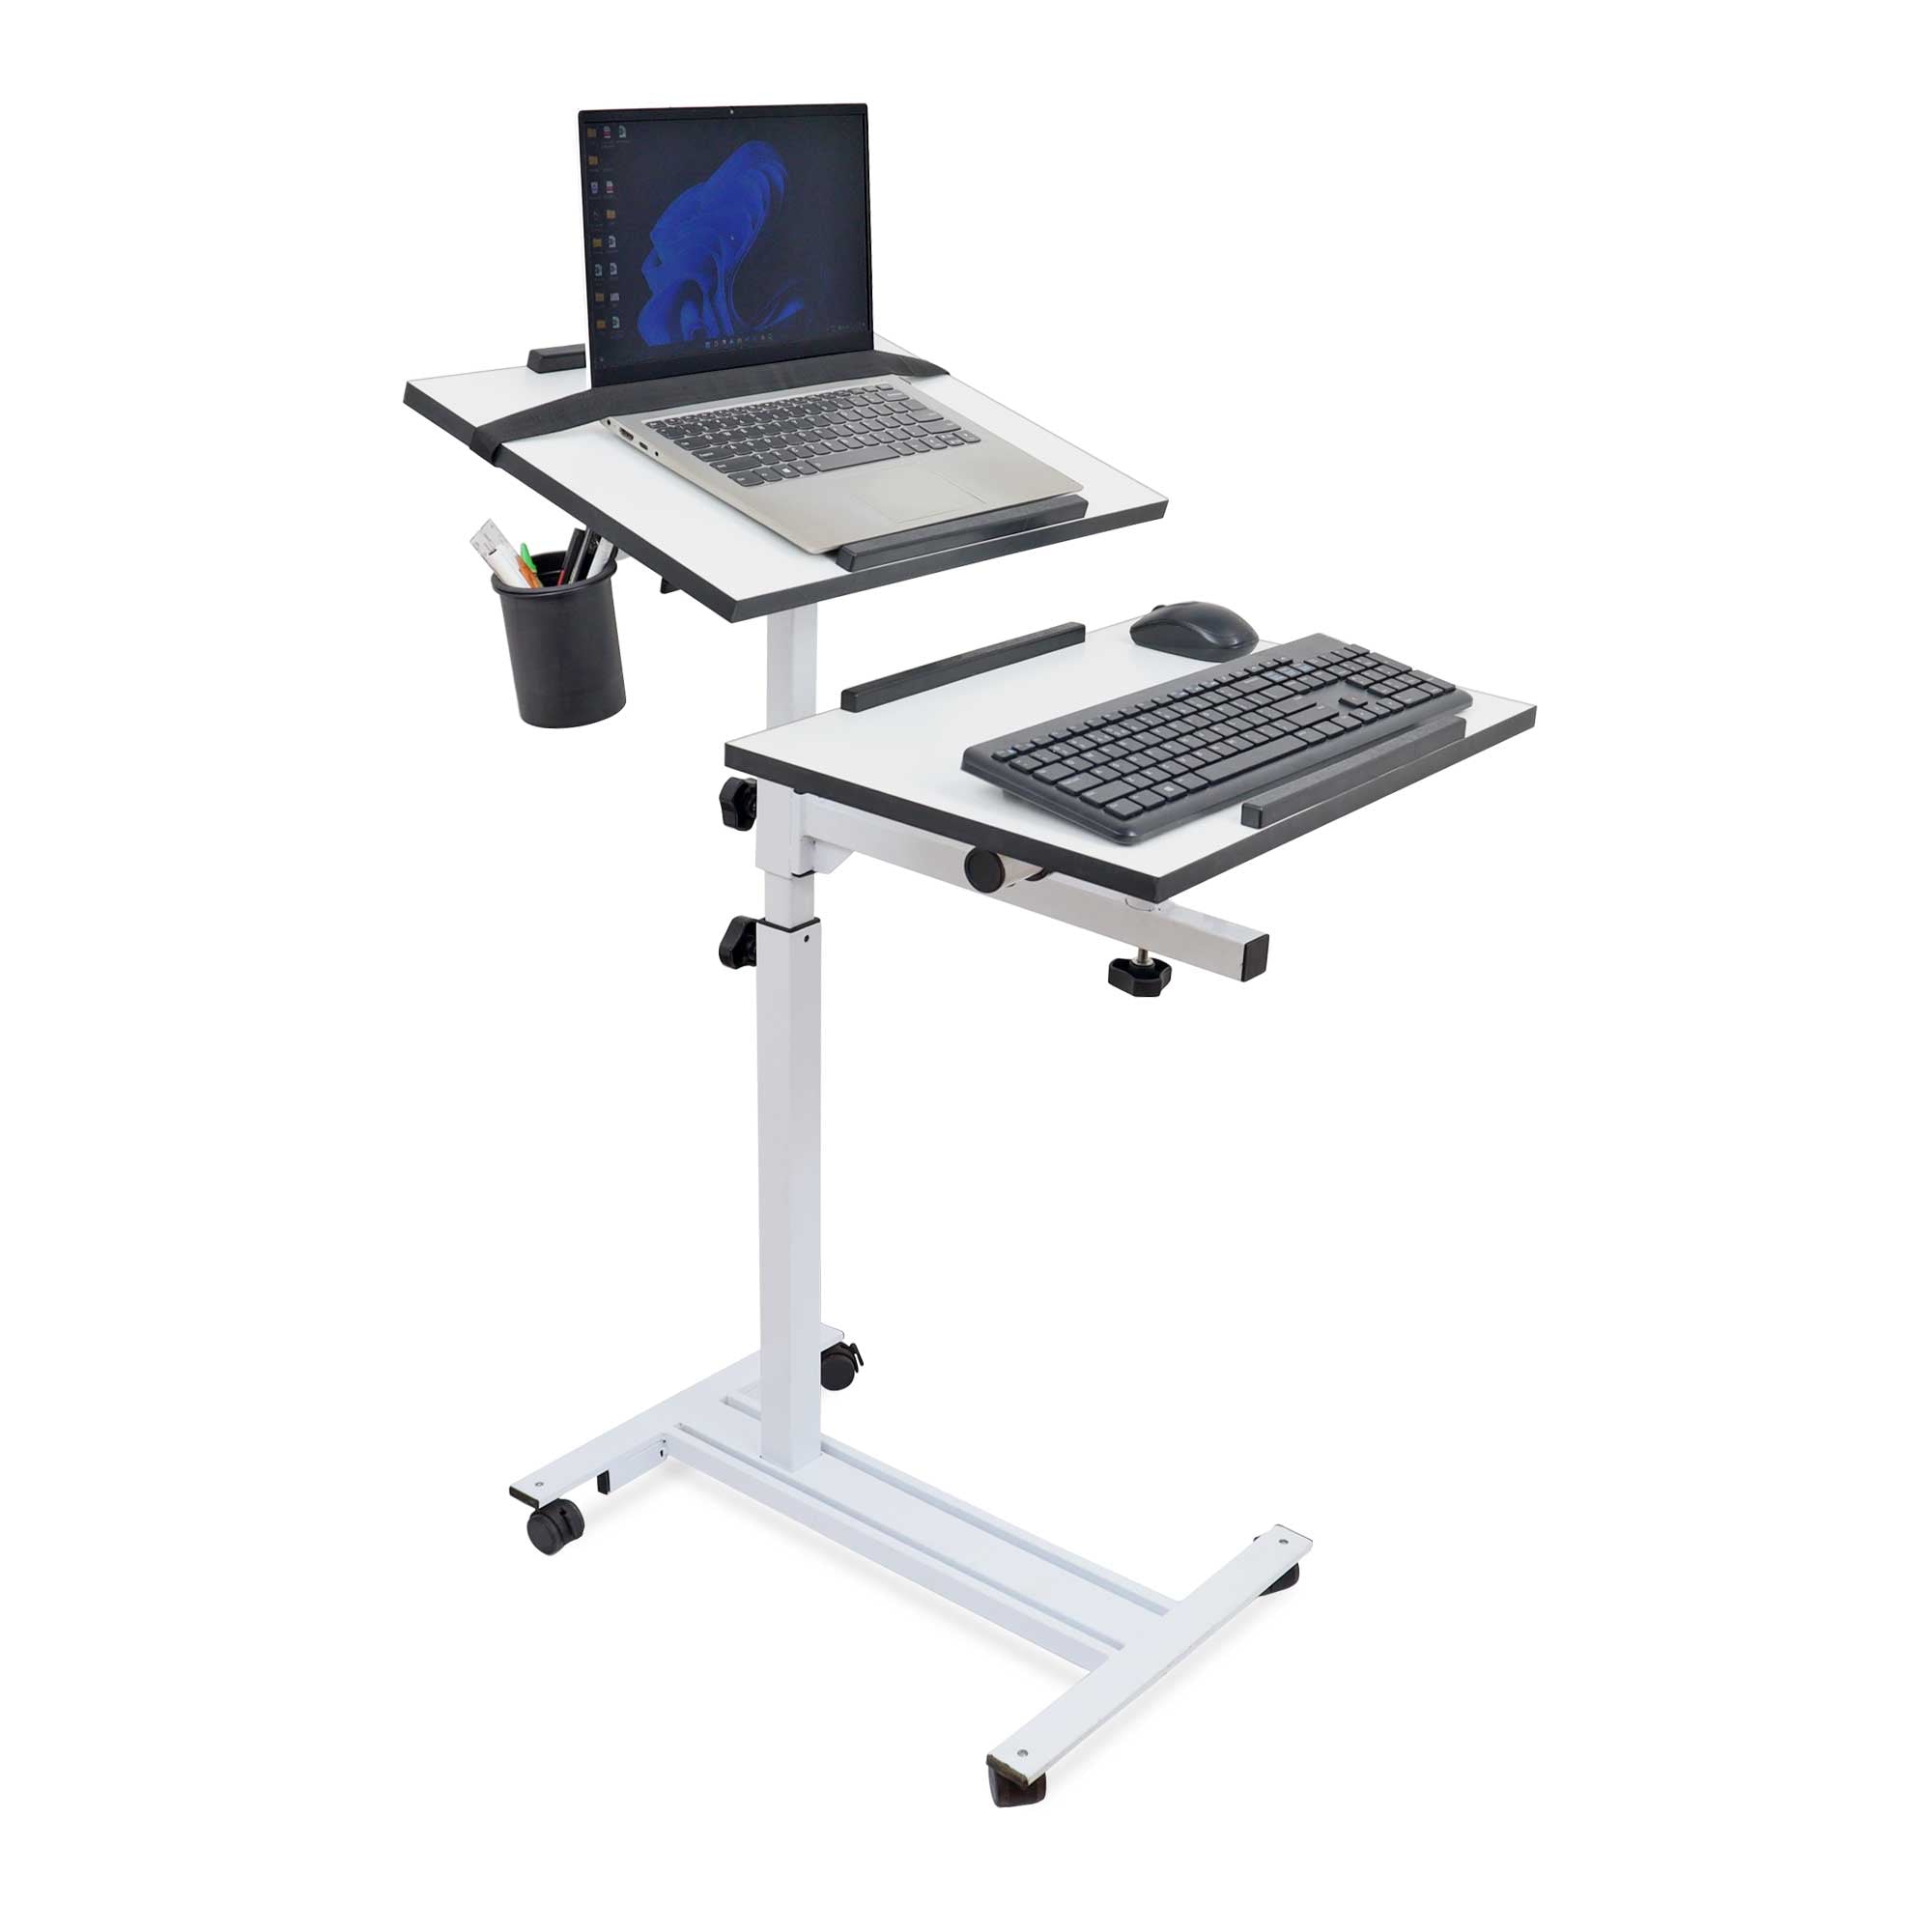 Multipurpose Adjustable Projector and Laptop Table